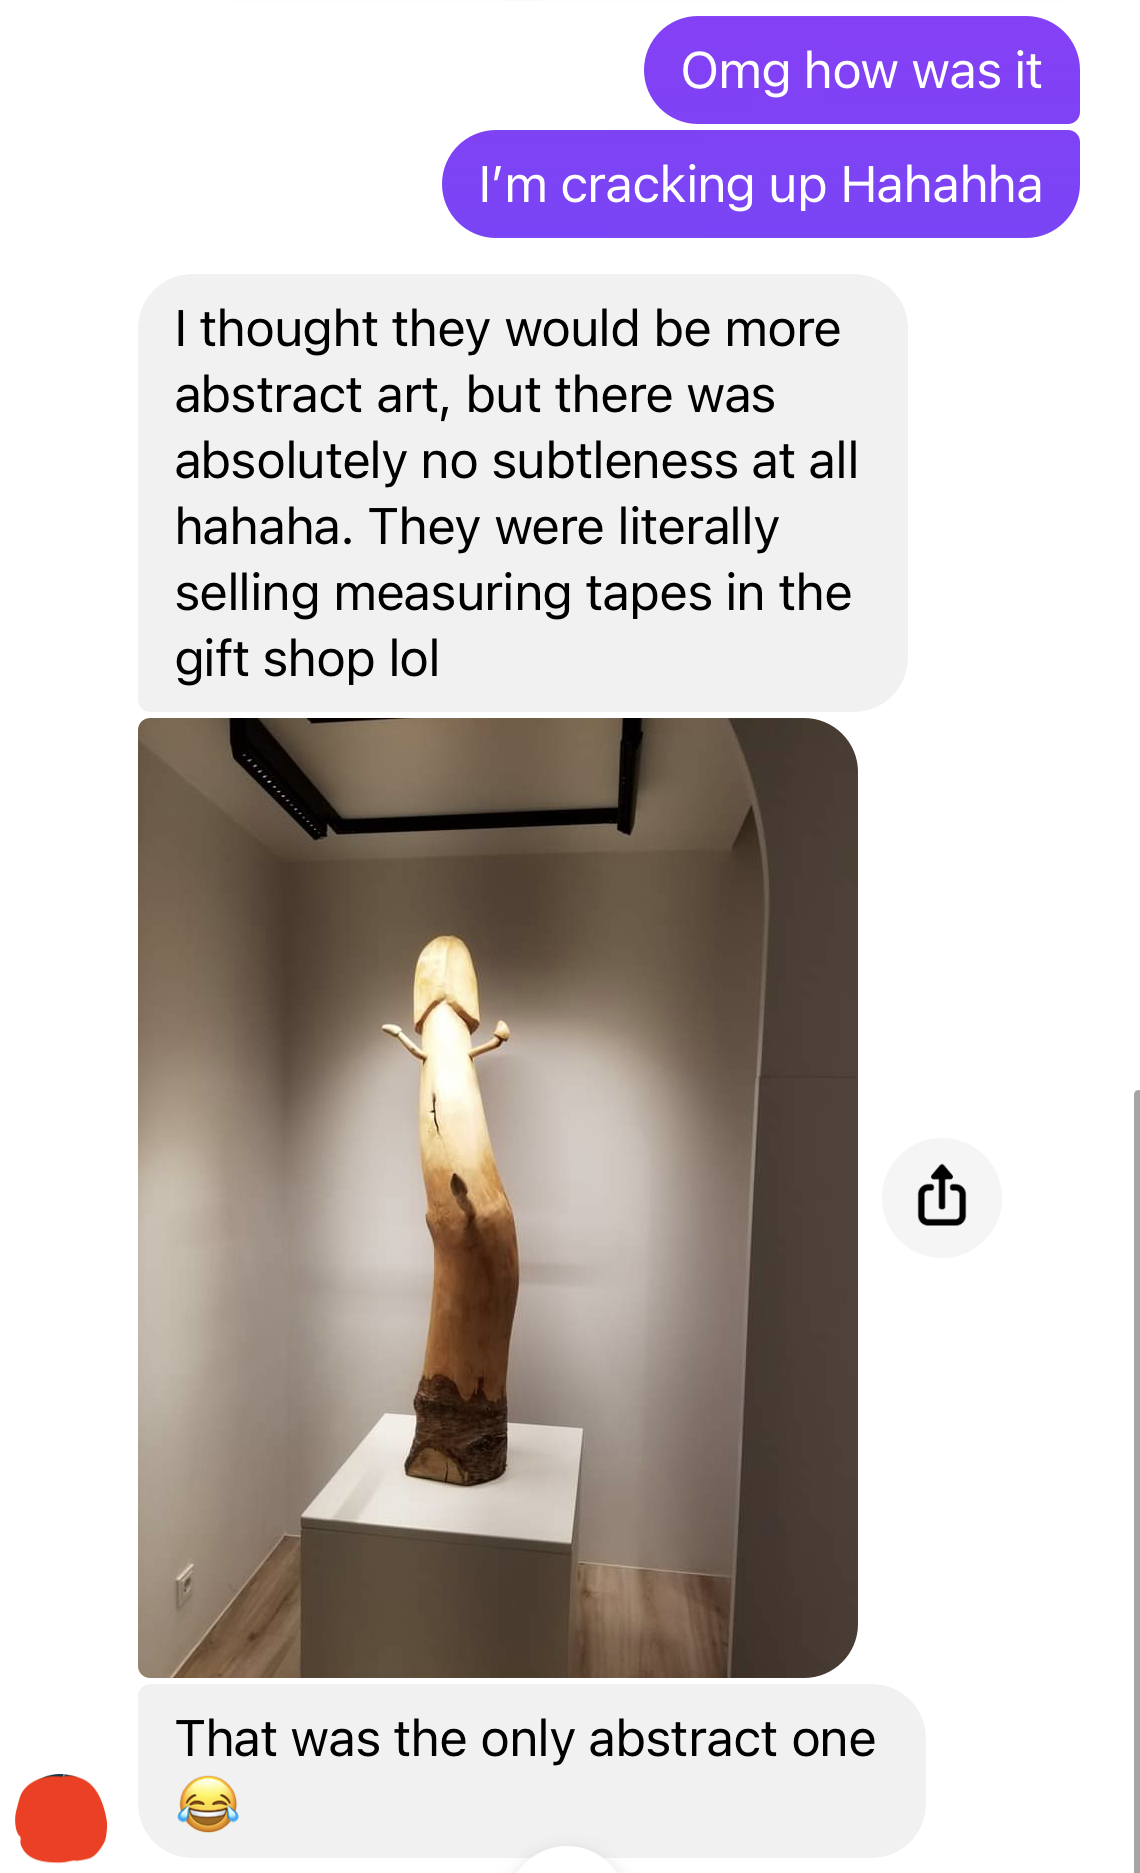 messages saying the person thought it&#x27;d be abstract art but it was no subtleness, and that they were selling measuring tapes in the gift shop, with a picture of a wooden statue of a penis